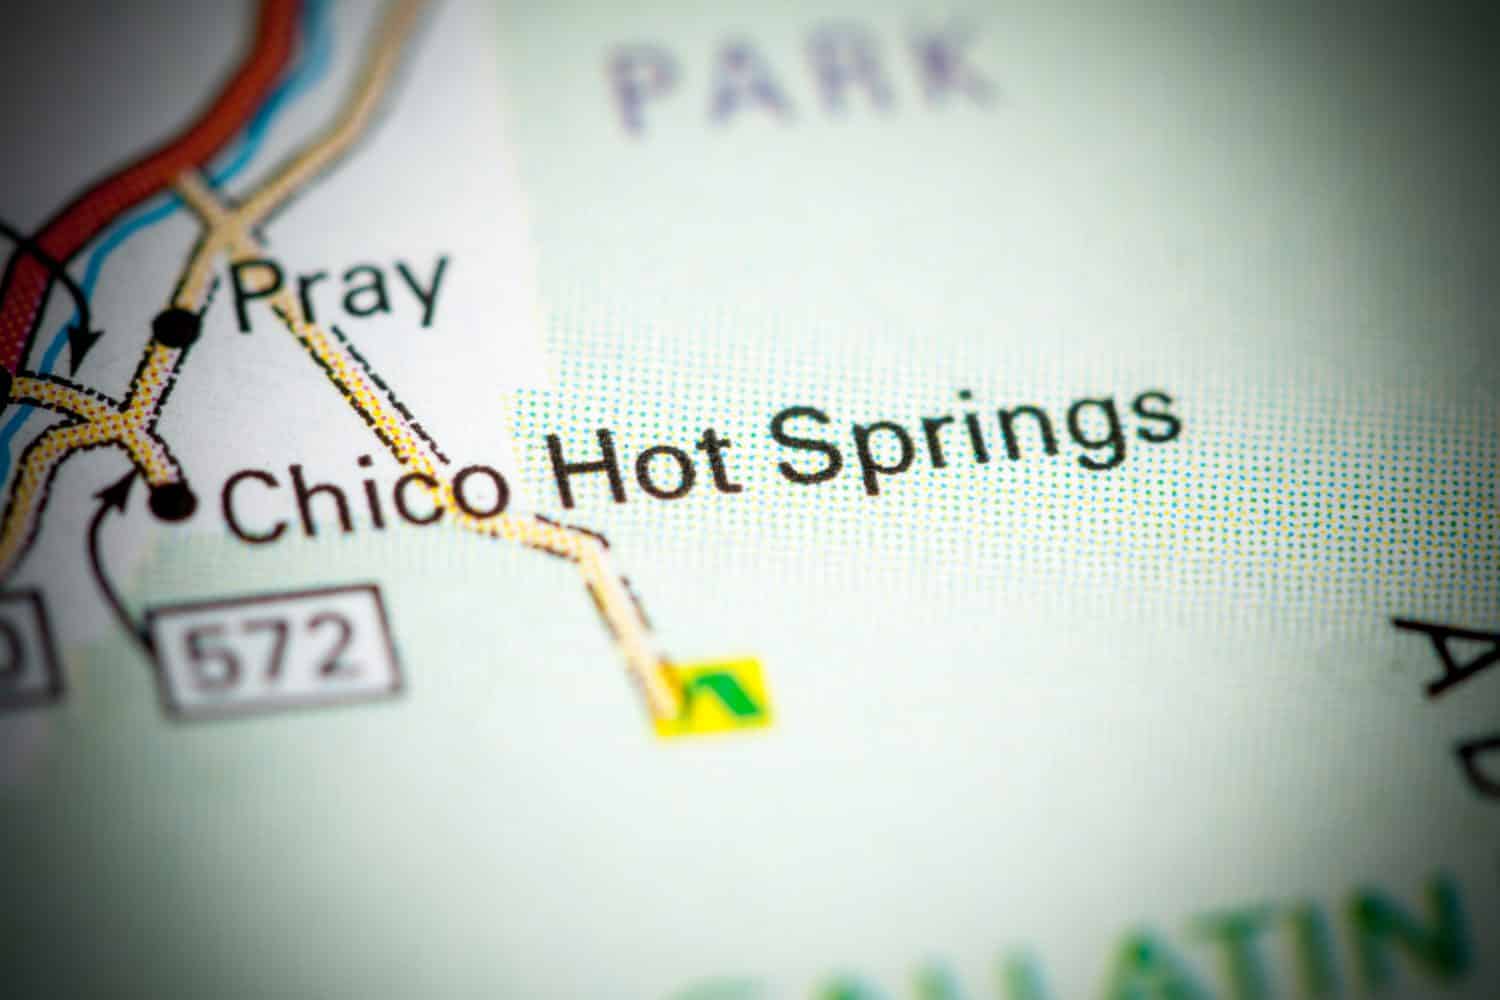 Chico Hot Springs. Montana on a map.